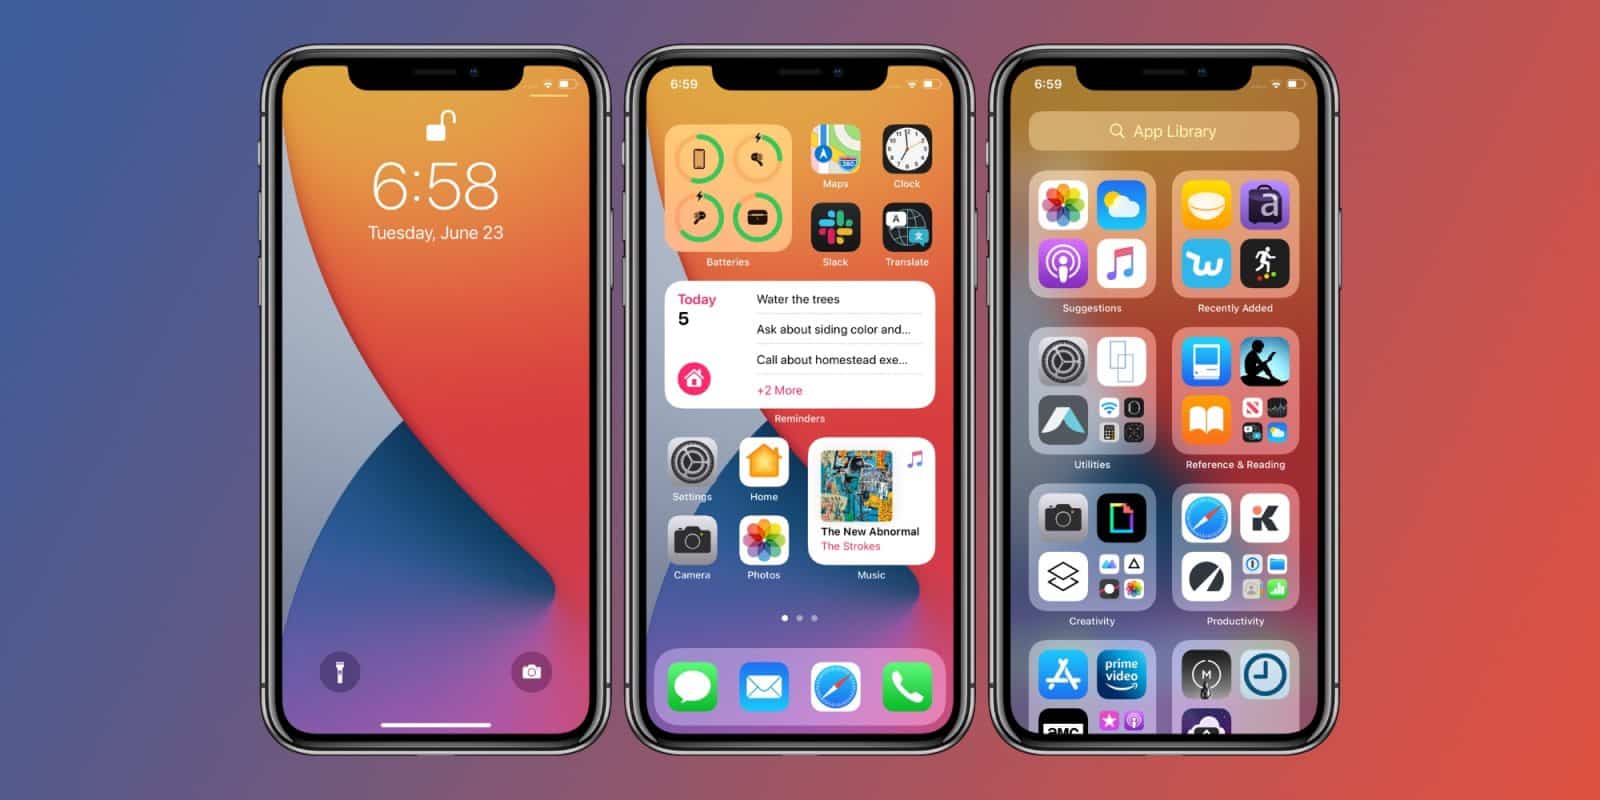 Apple’s iOS 14 Update Is Packed With Cool Features - Fortress of Solitude